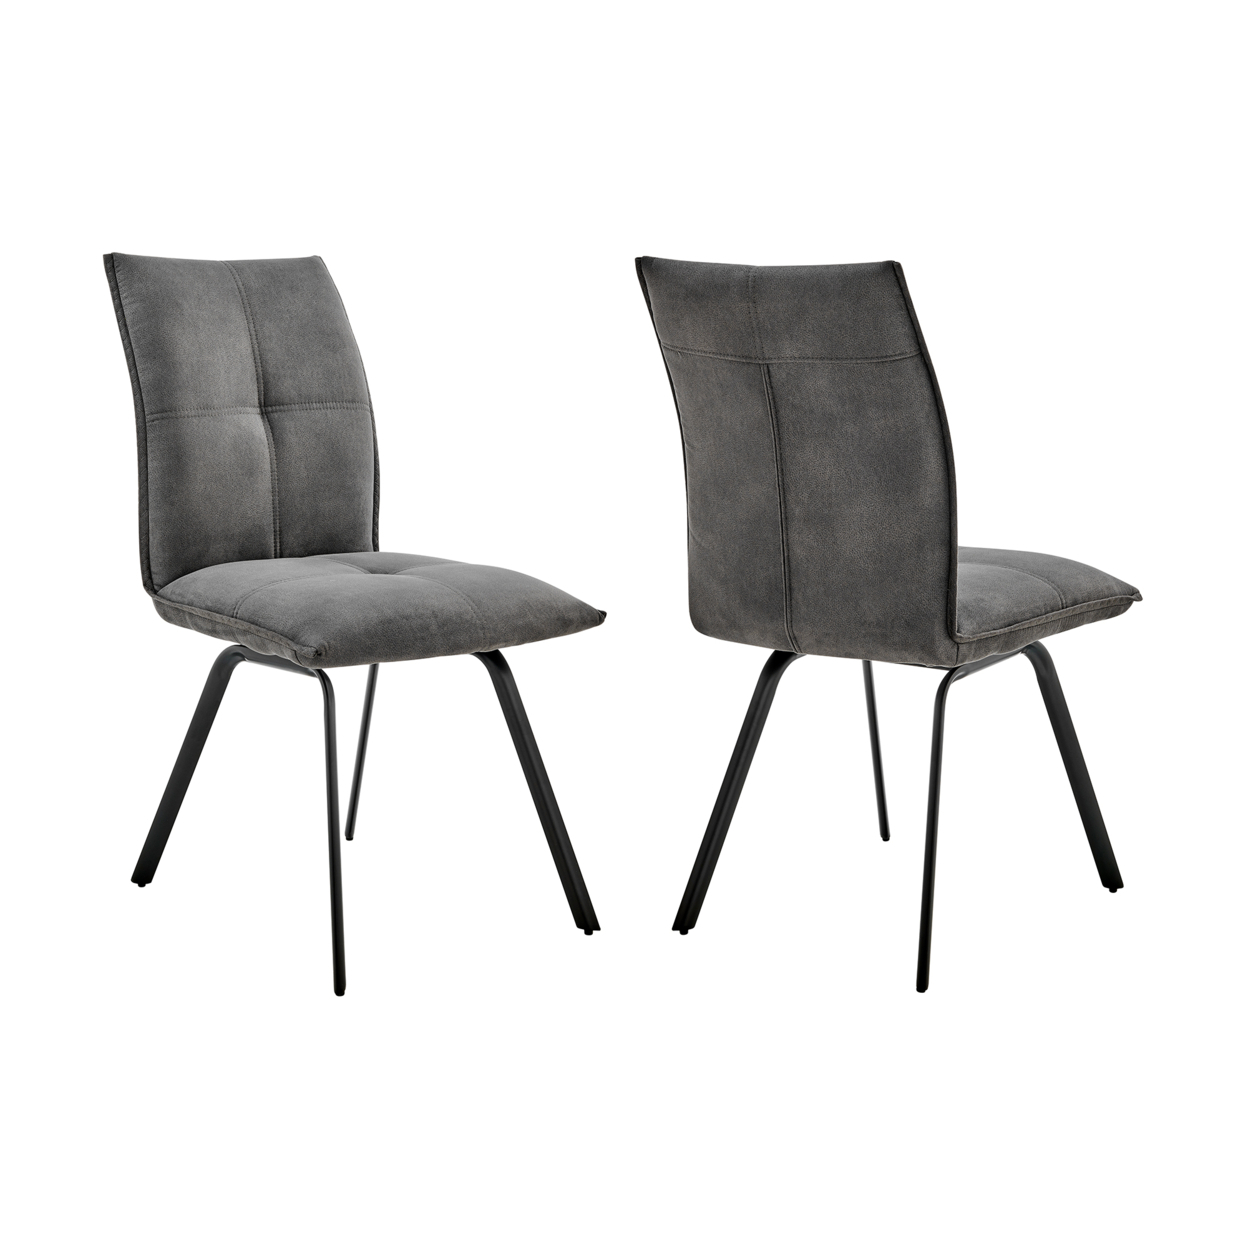 Dining Chair With Welt Trim Stitching, Set Of 2, Gray And Black- Saltoro Sherpi